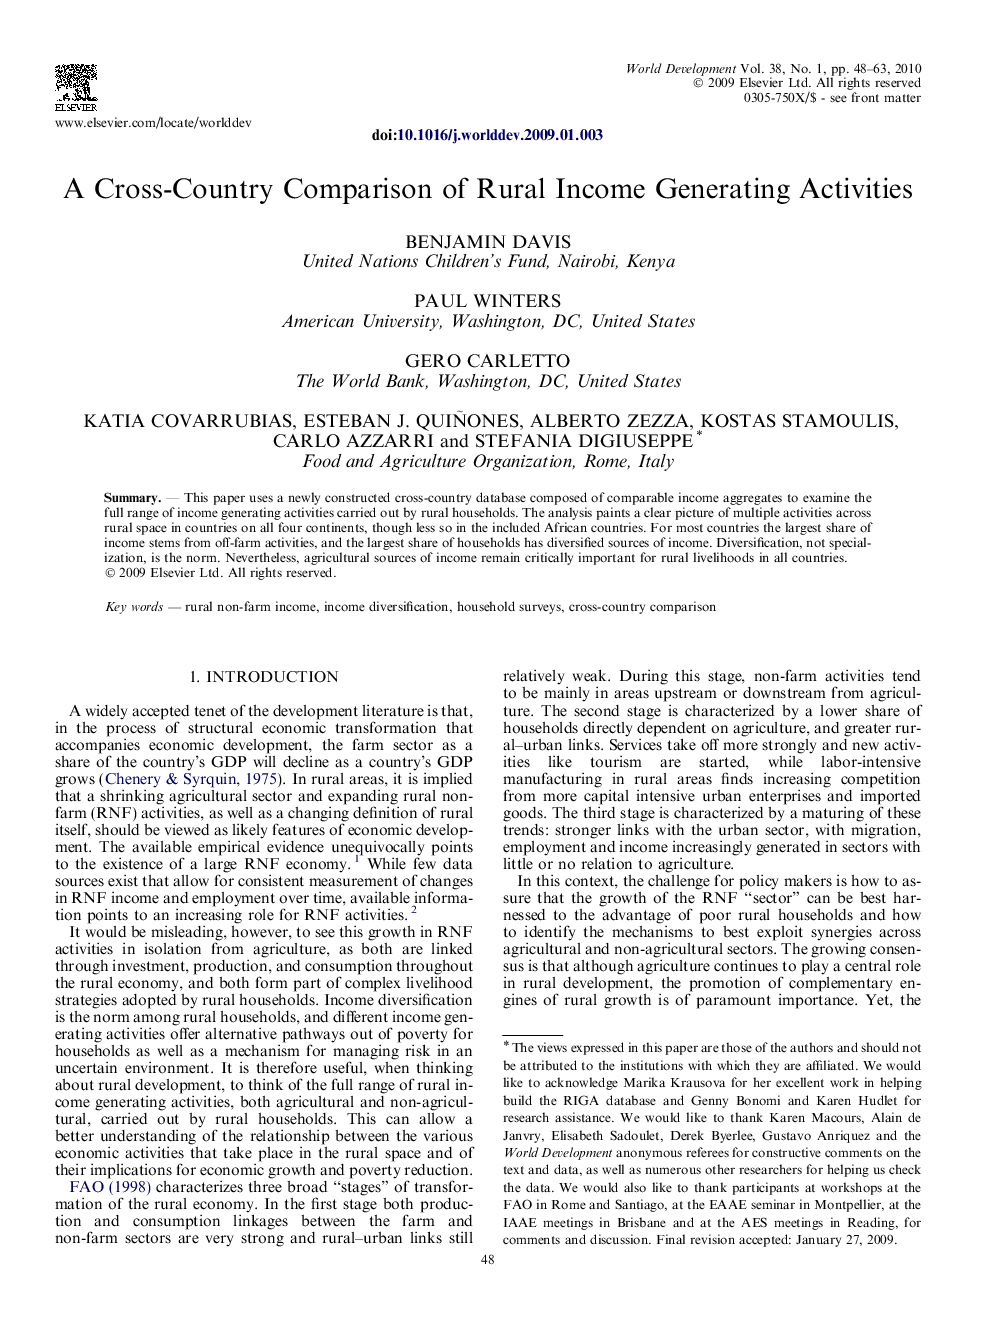 A Cross-Country Comparison of Rural Income Generating Activities